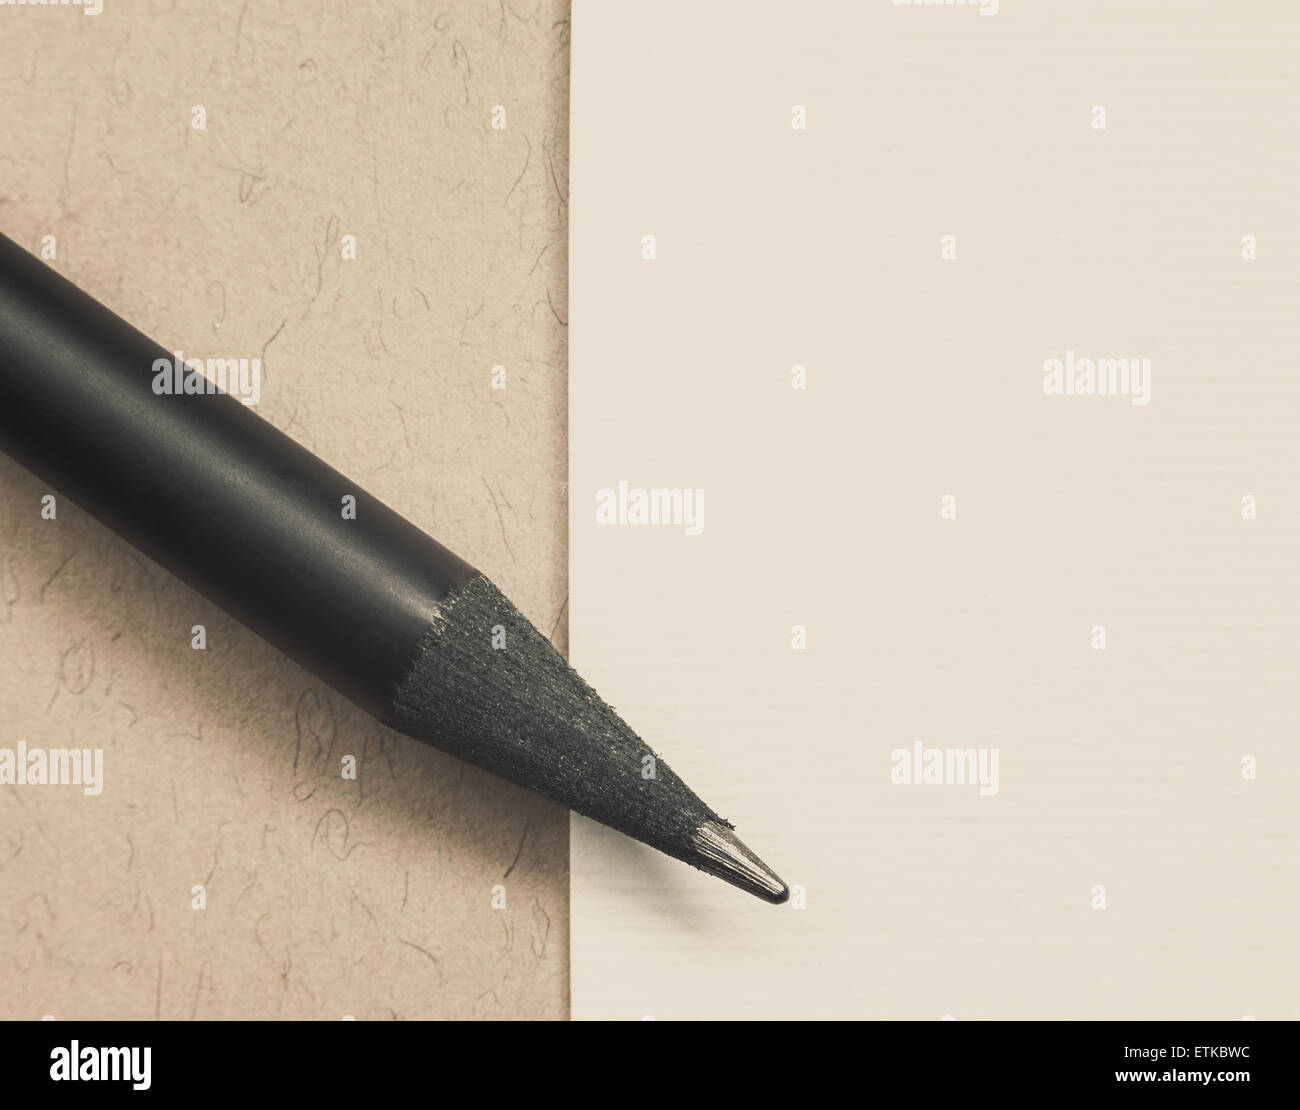 Black new wooden pencil and white paper, simple composition with empty space. Stock Photo